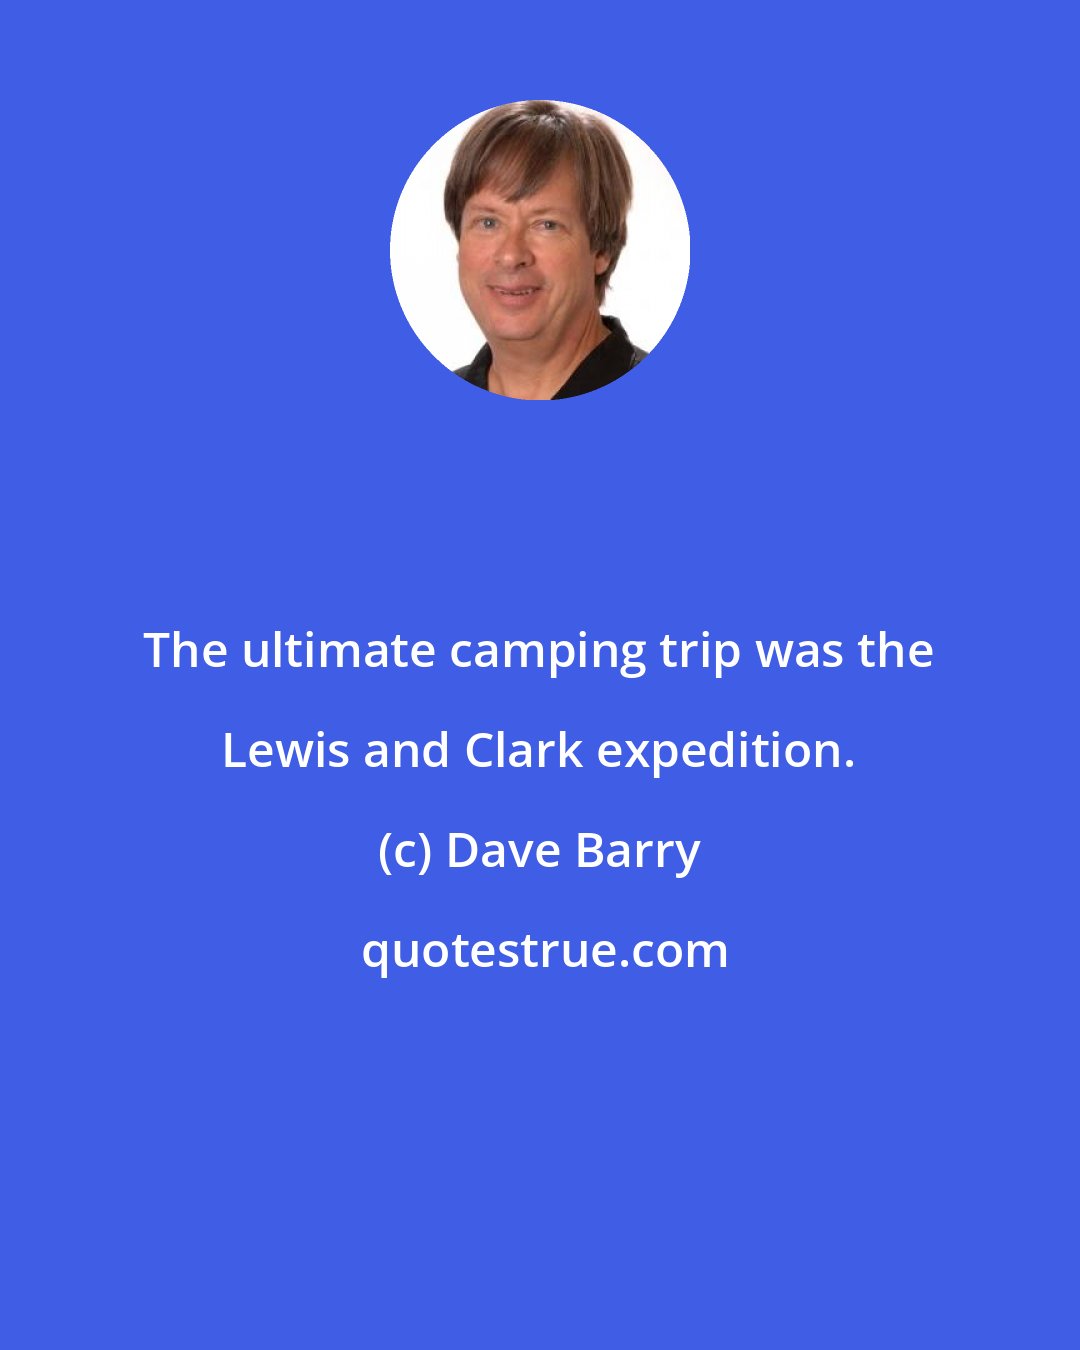 Dave Barry: The ultimate camping trip was the Lewis and Clark expedition.